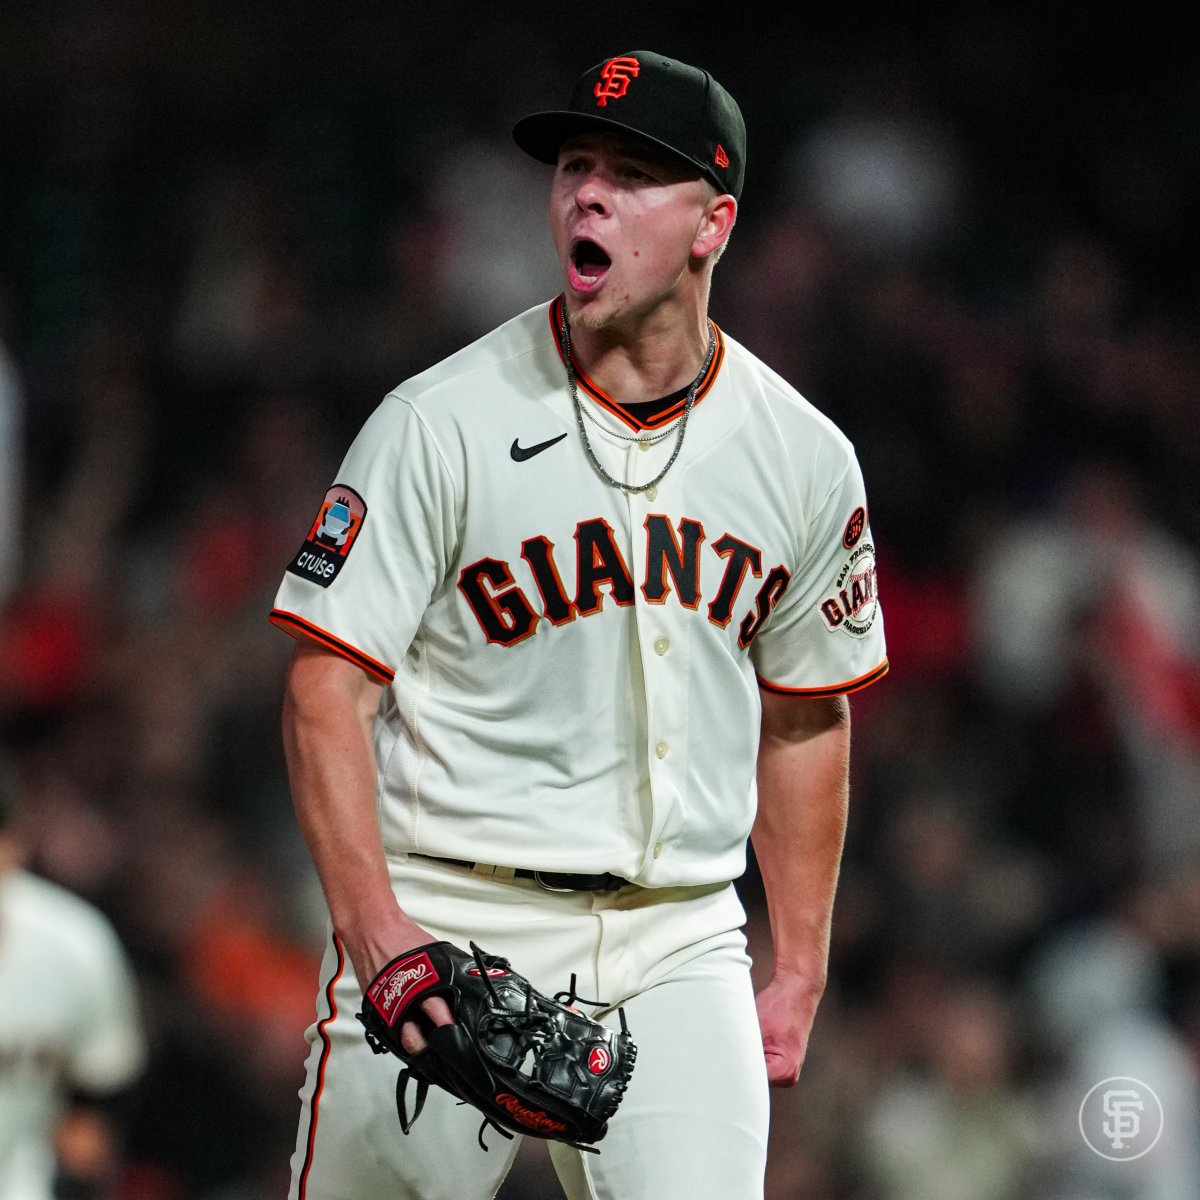 The Reds and Giants can not be stopped 